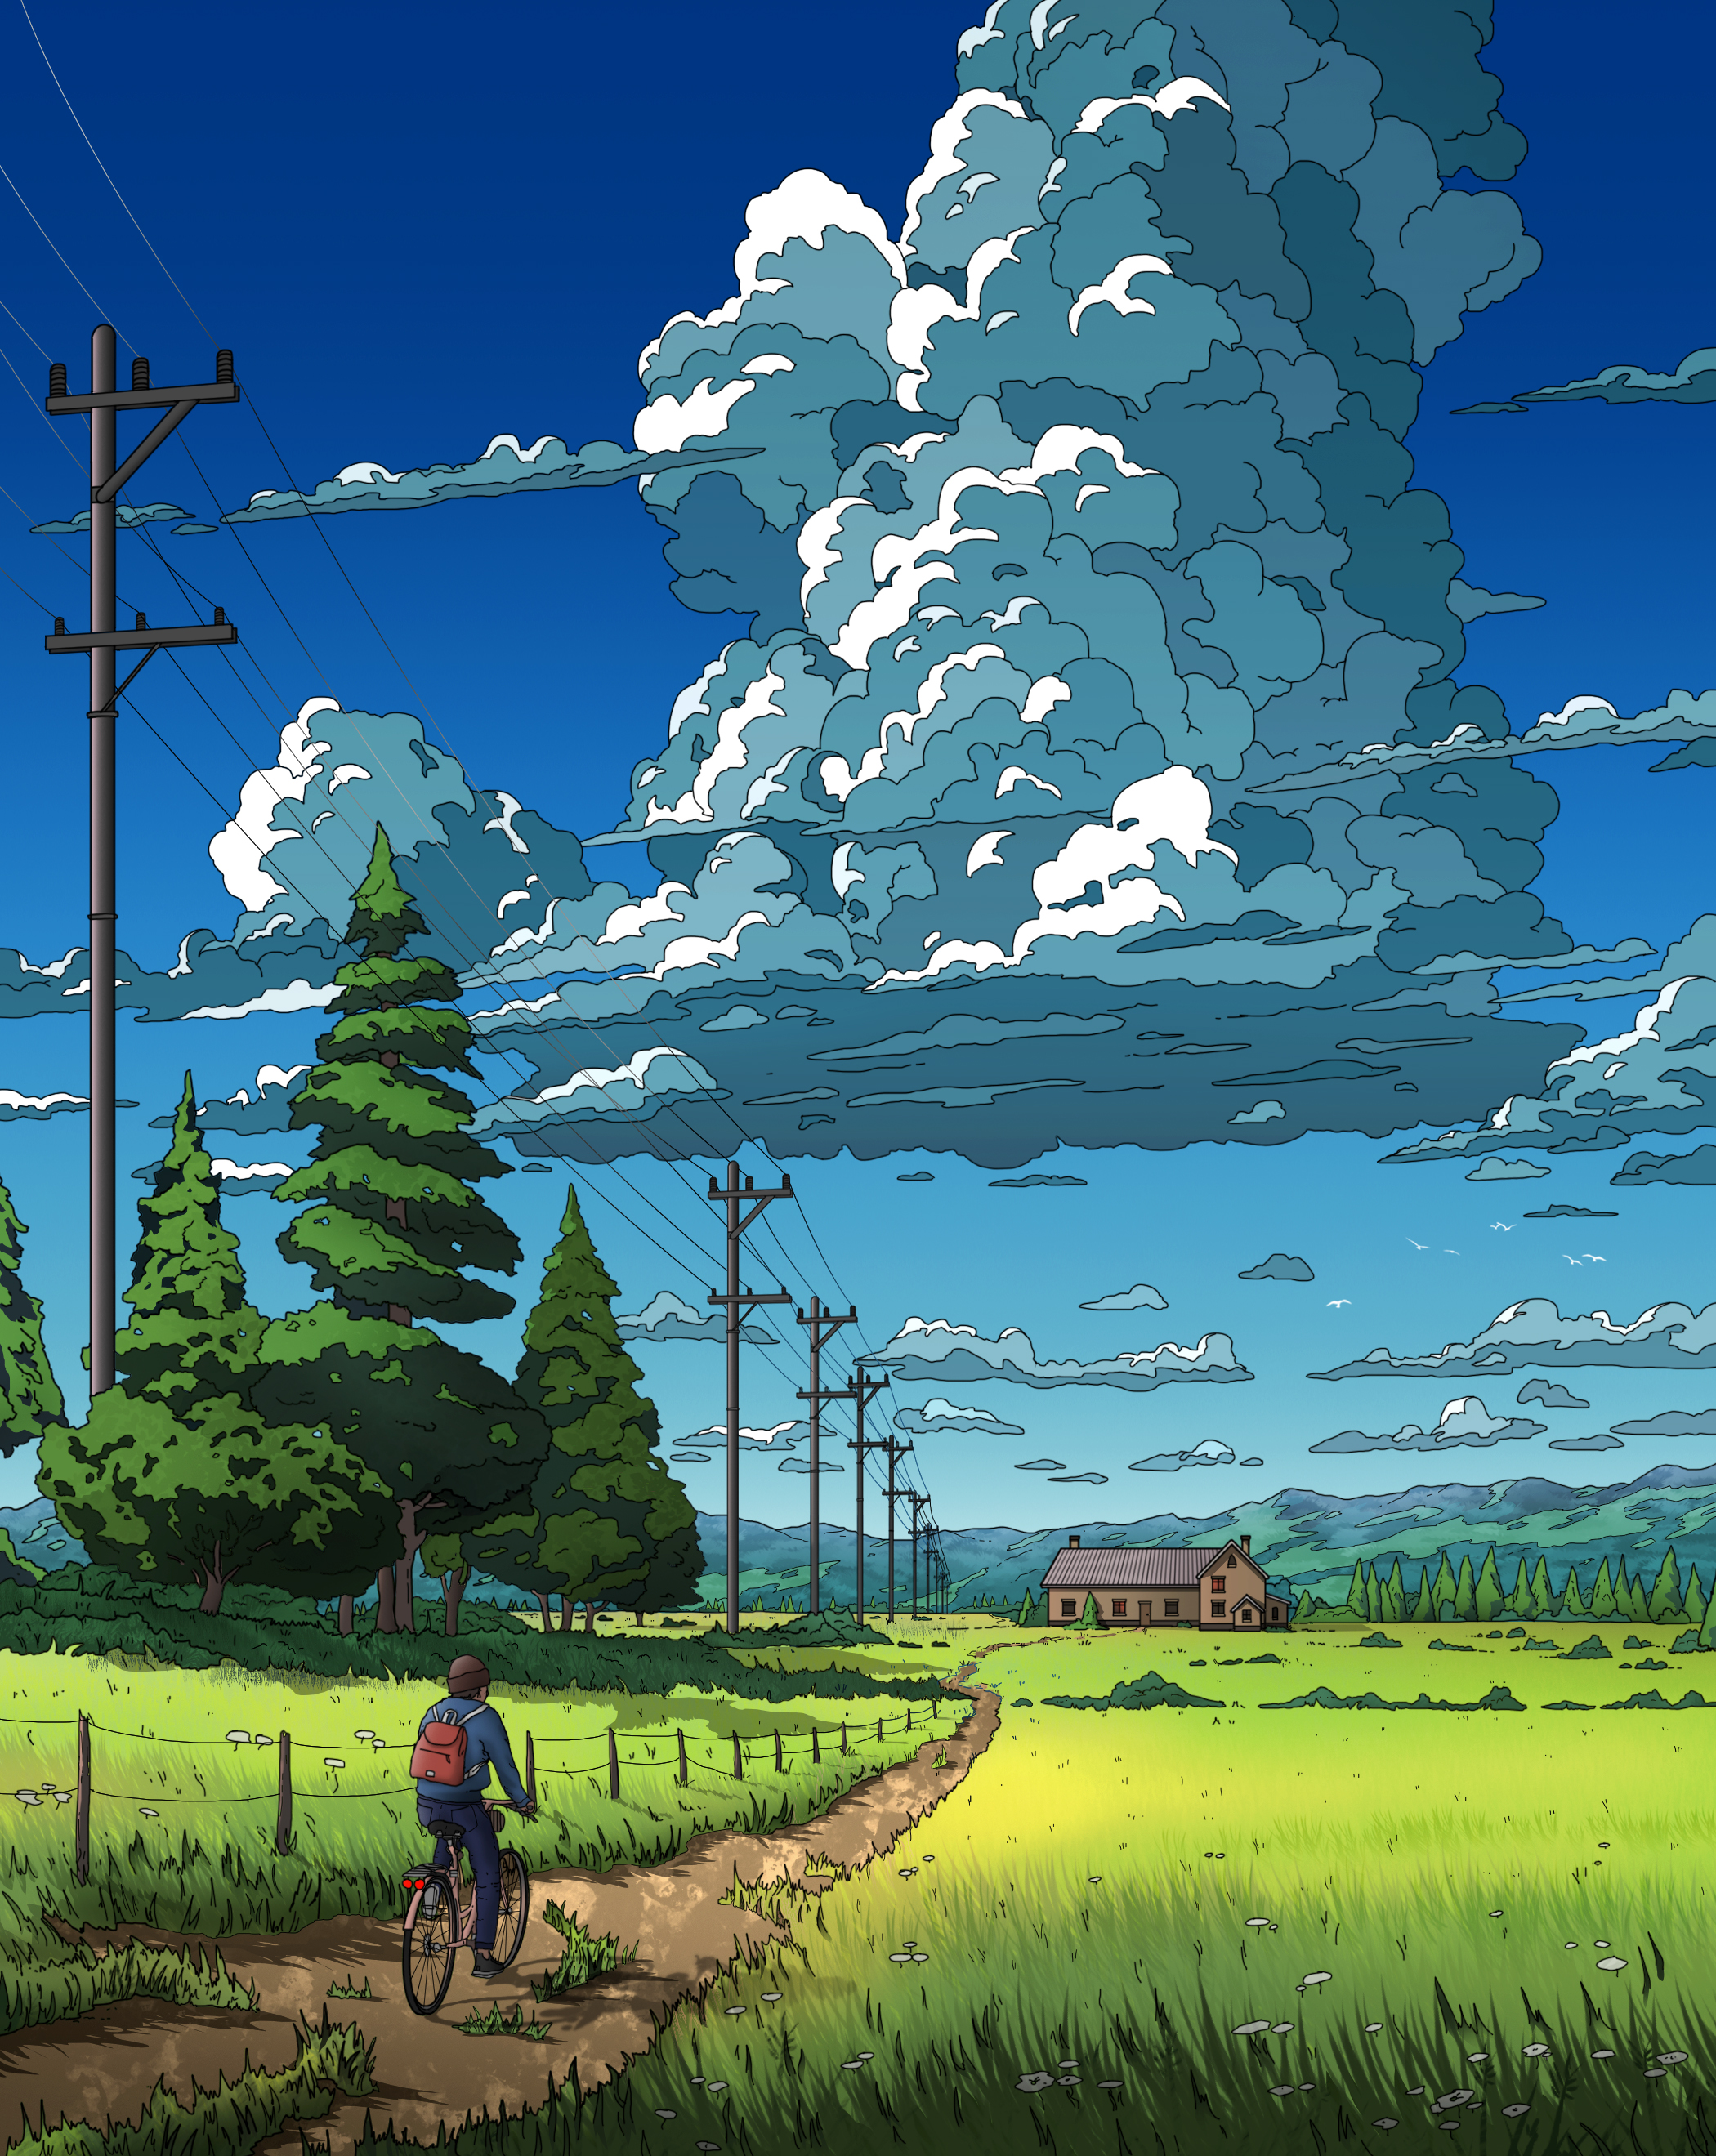 General 2100x2639 Christian Demczuk artwork digital art illustration field house trees power lines nature bicycle mountains portrait display grass clouds backpacks path flowers sky